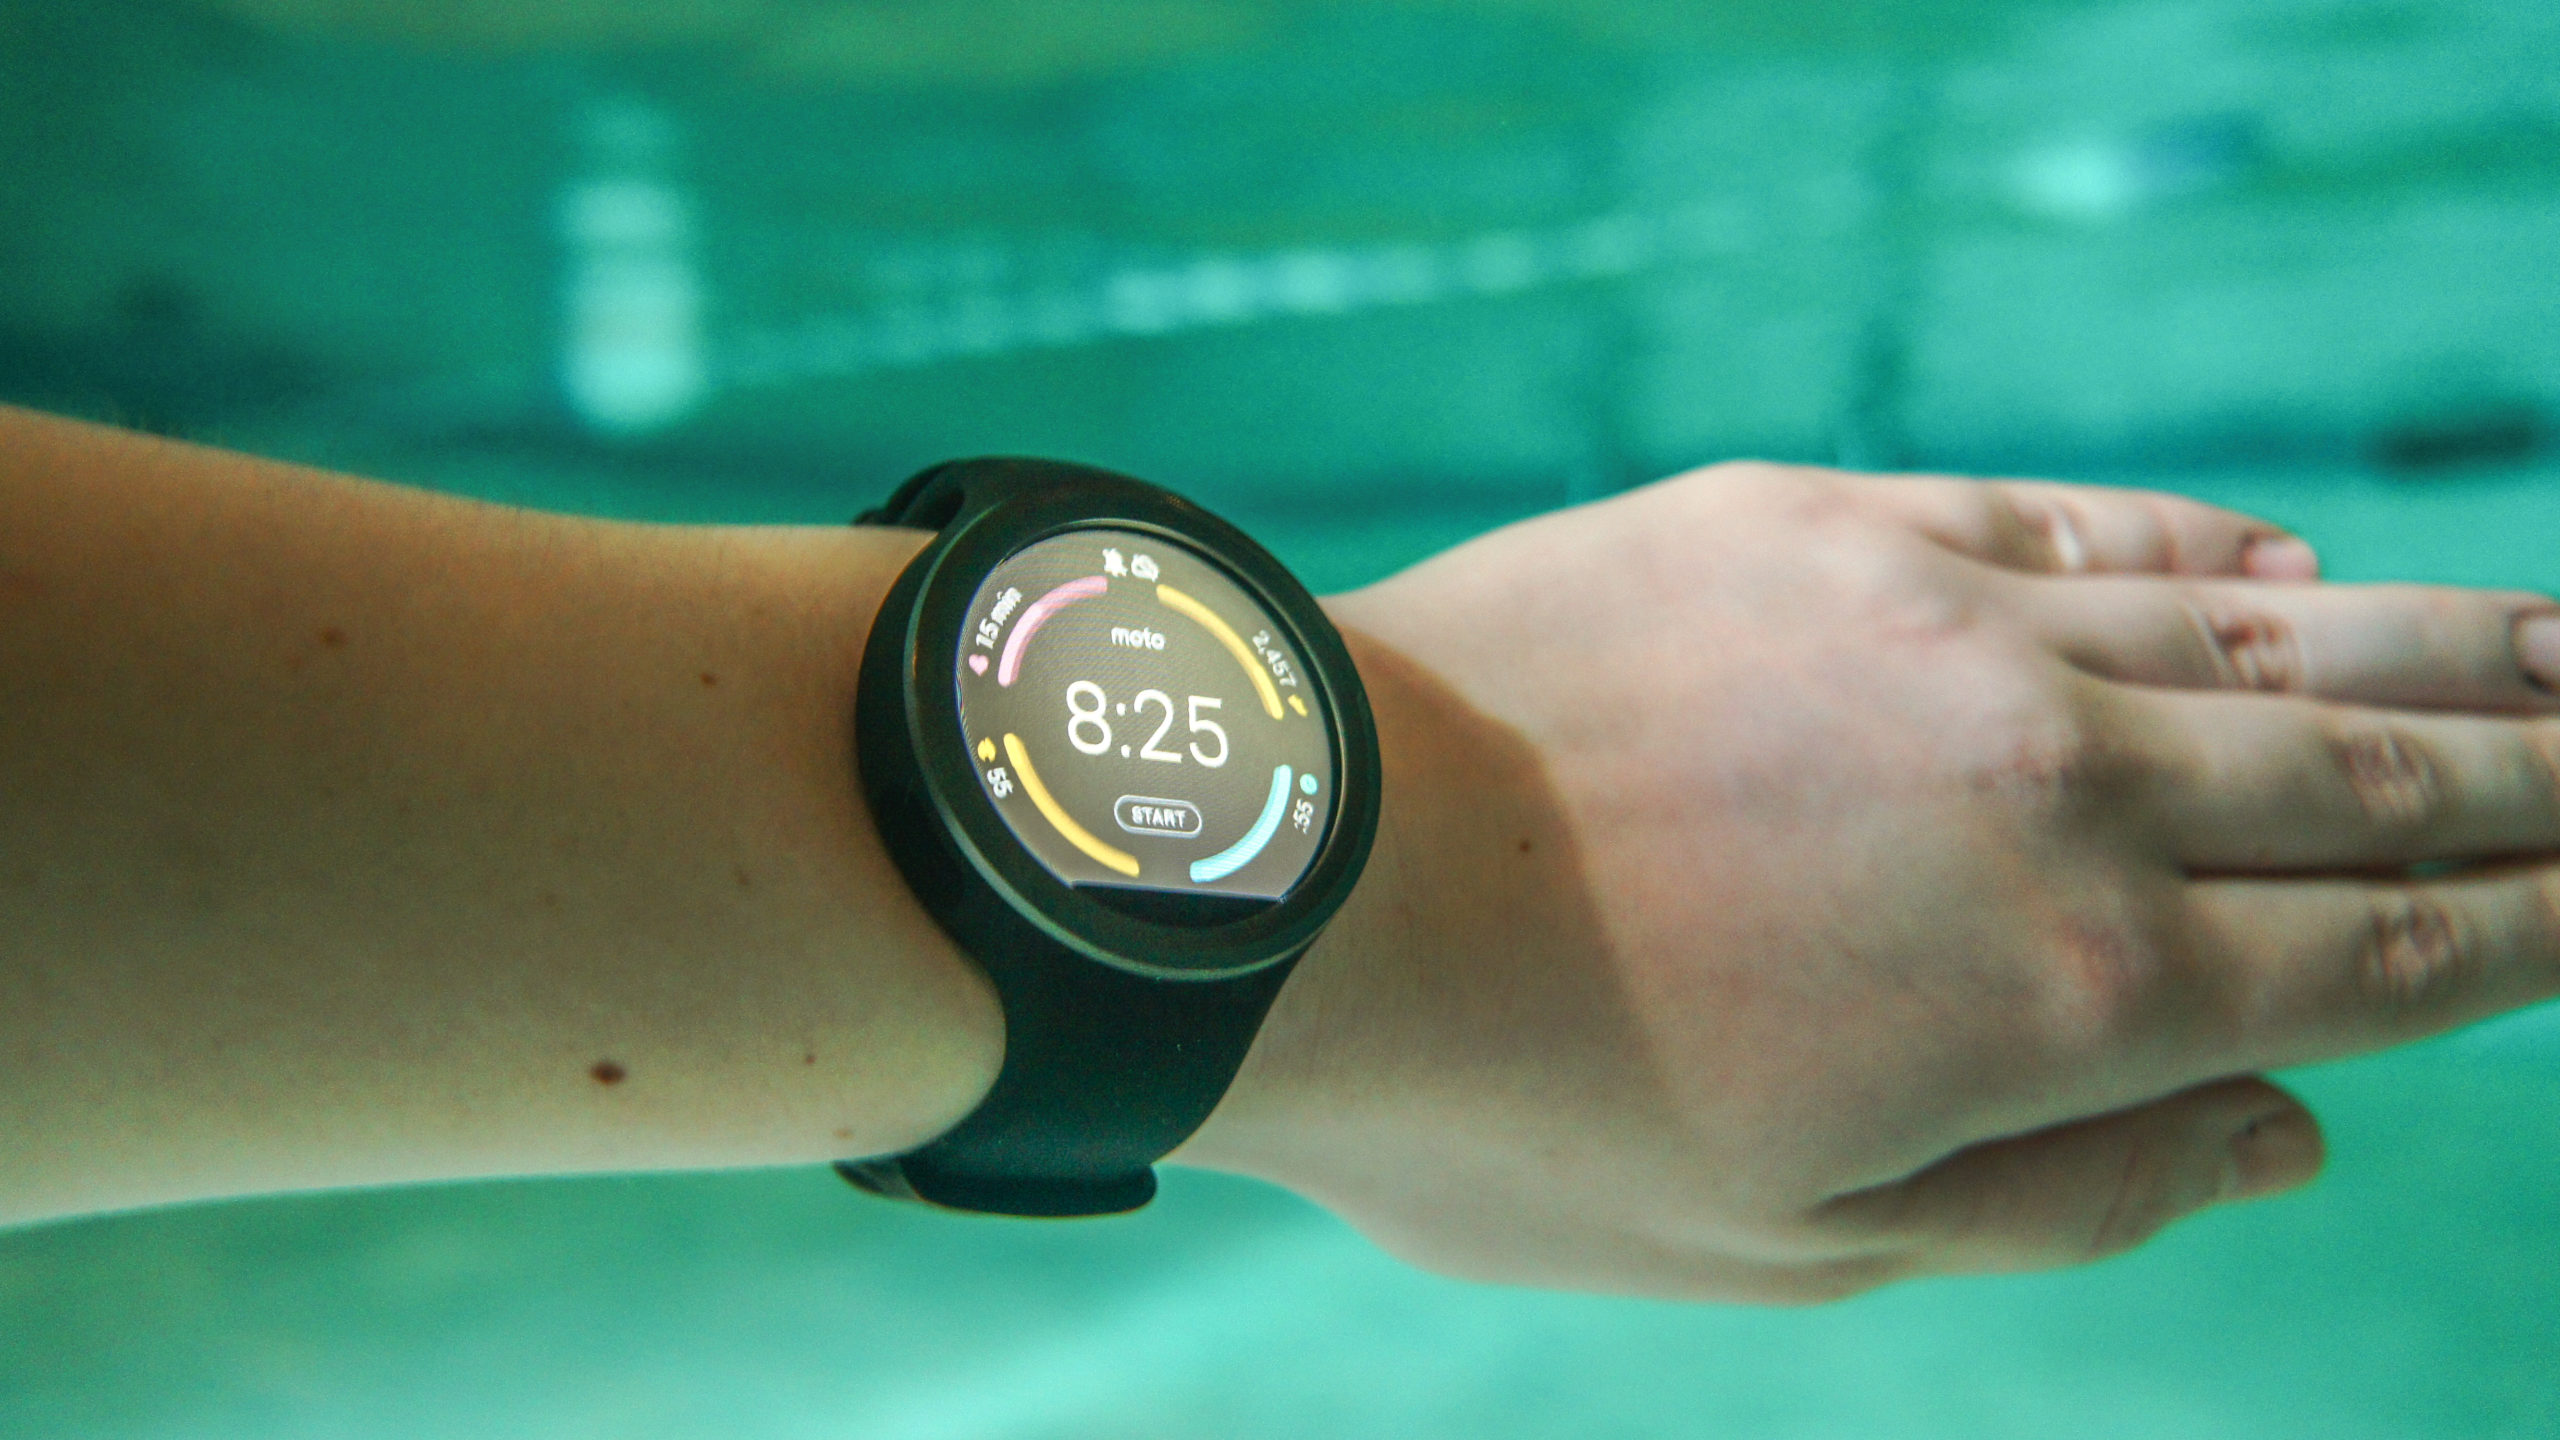 Moto 360 Sport Review: Half-Way Between Android Wear And Fitness Tracker